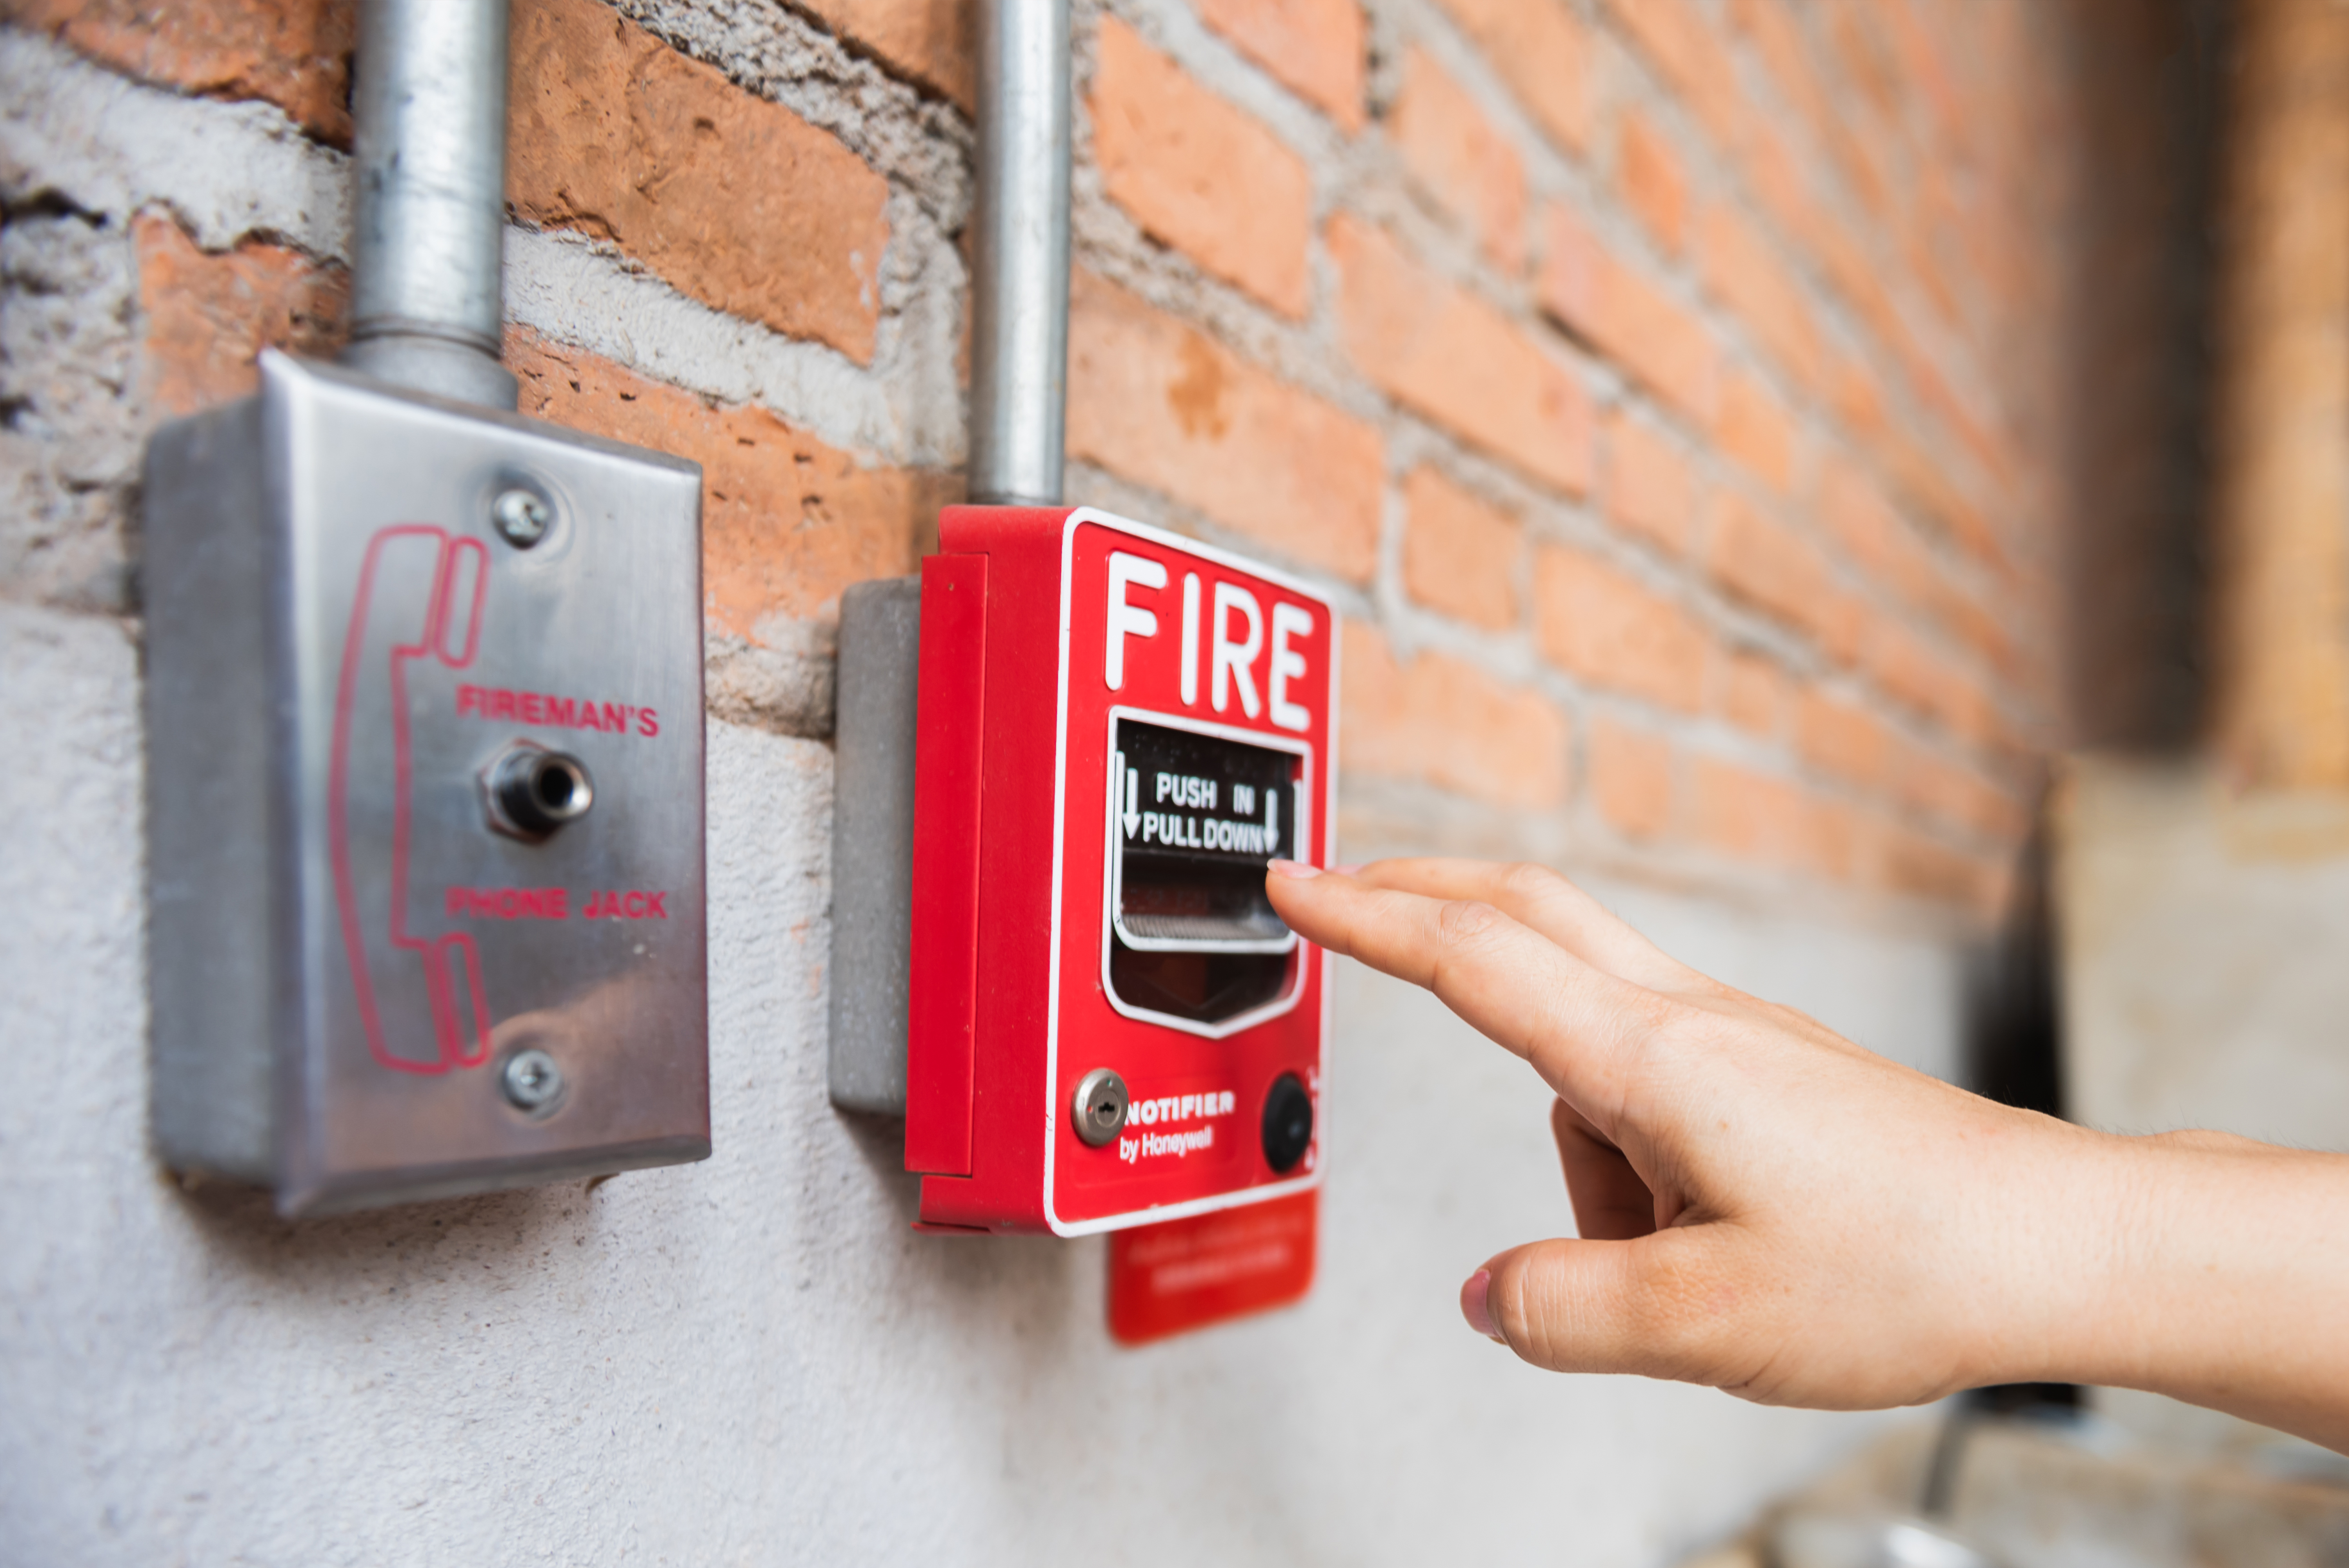 Hand of woman reaching to Fire alarm switch system | Source: Getty Images